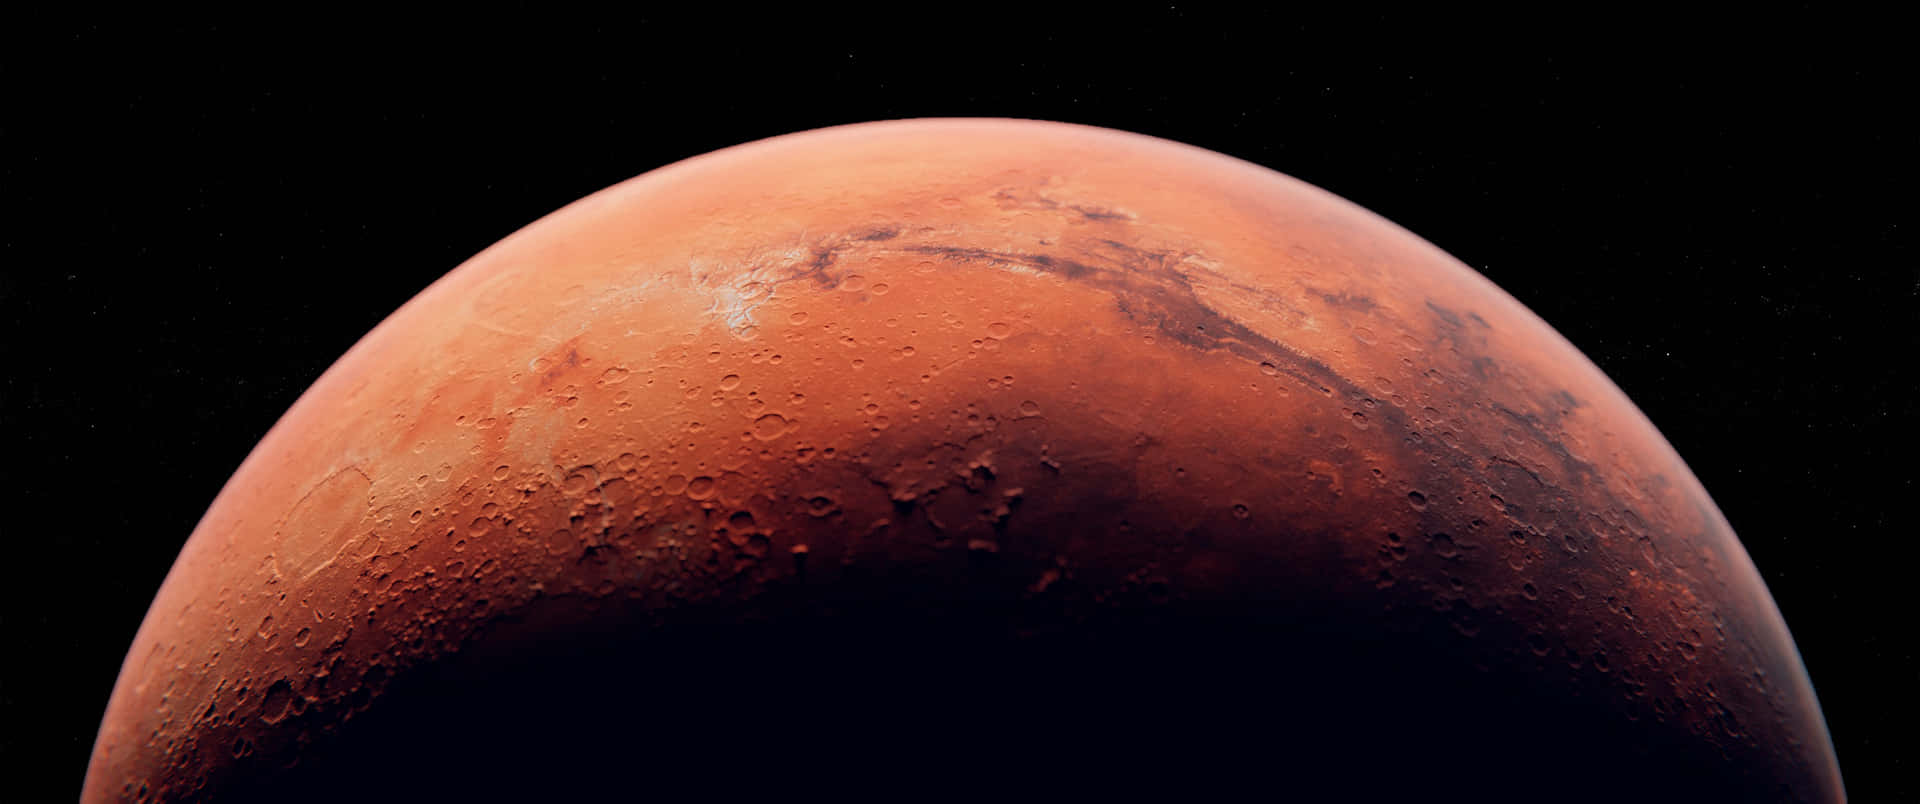 Take a trip into outer space and explore the mysterious planet, Mars